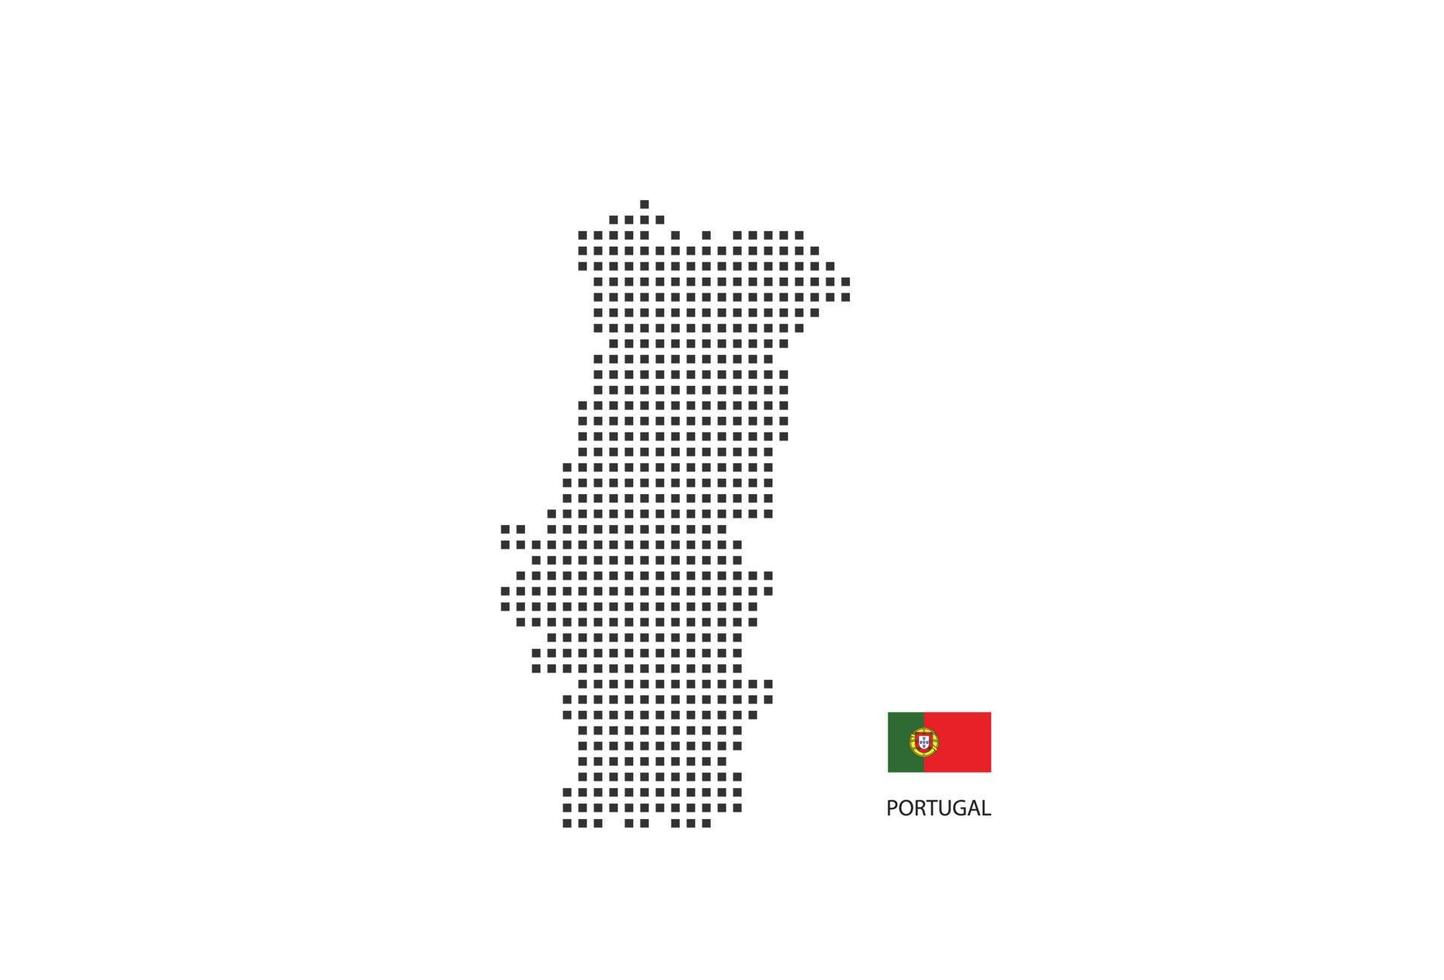 Vector square pixel dotted map of Portugal isolated on white background with Portugal flag.